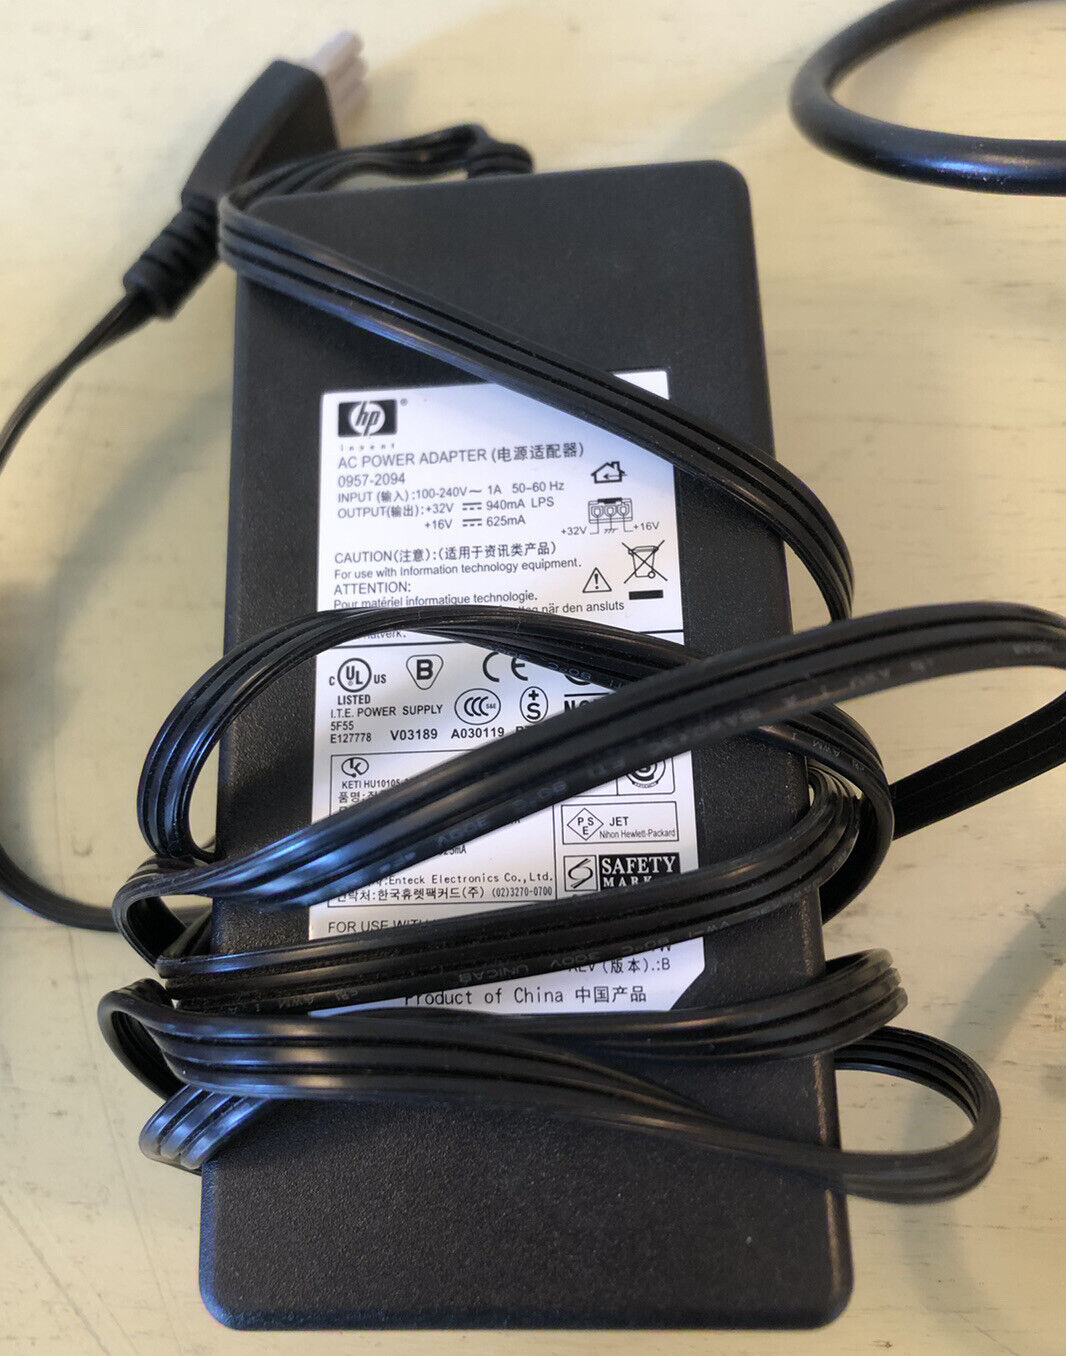 0957-2094 AC Adapter Power for HP Photosmart C3140 C4180 PSC 1350 1510